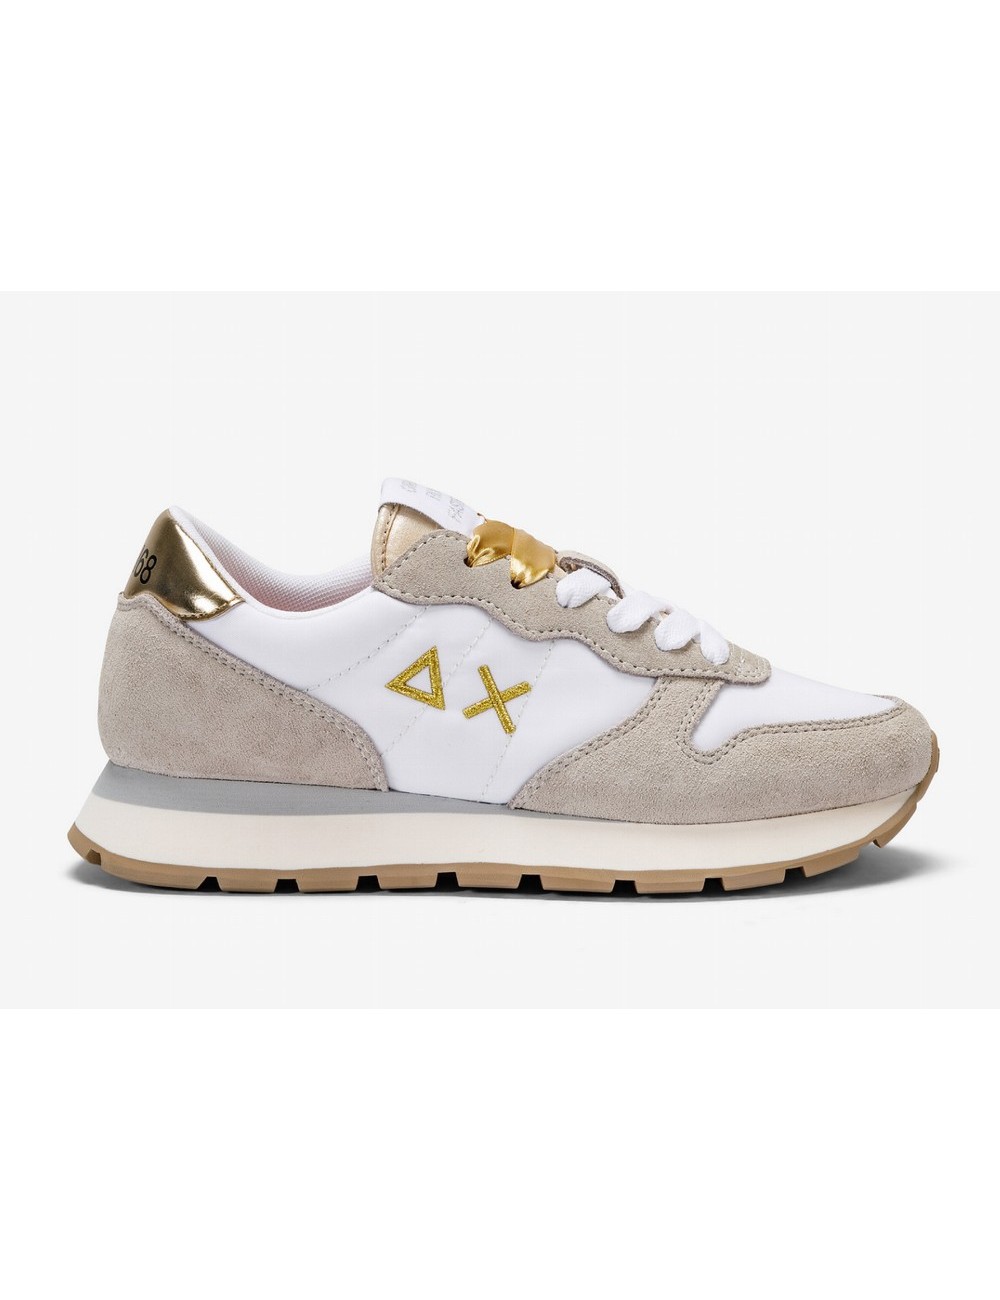 SNEAKERS ALLY GOLD SILVER BIANCO BIANCO PANNA